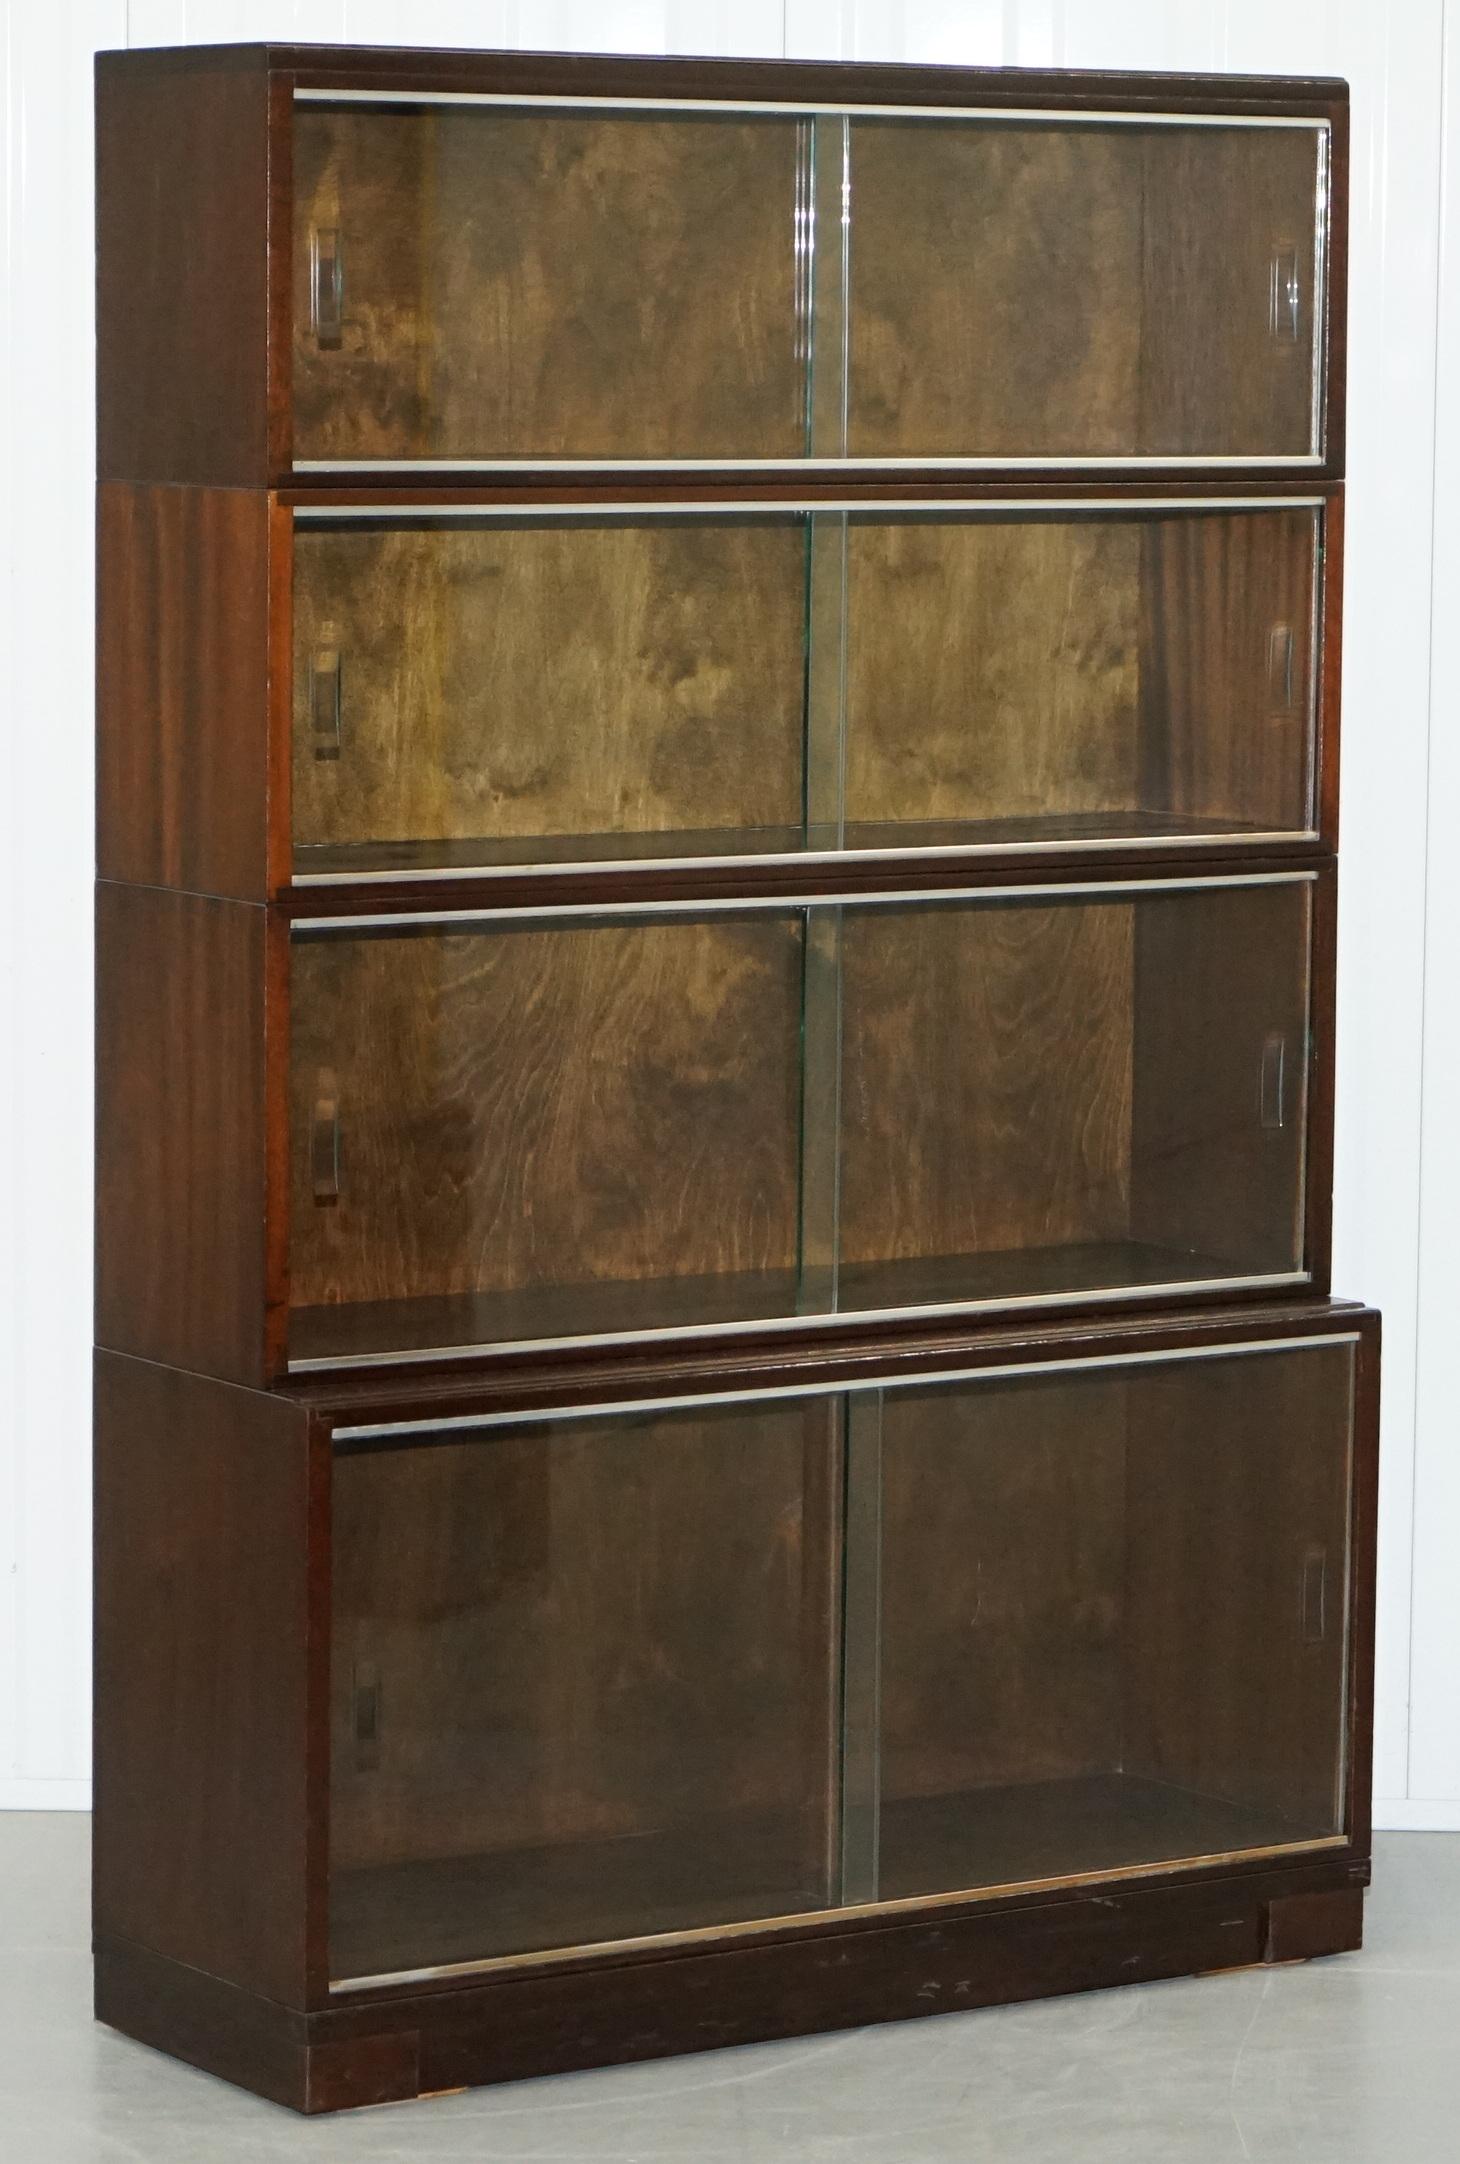 Legal Library Suite of Minty Oxford Modular Stacking Mahogany Library Bookcases 1